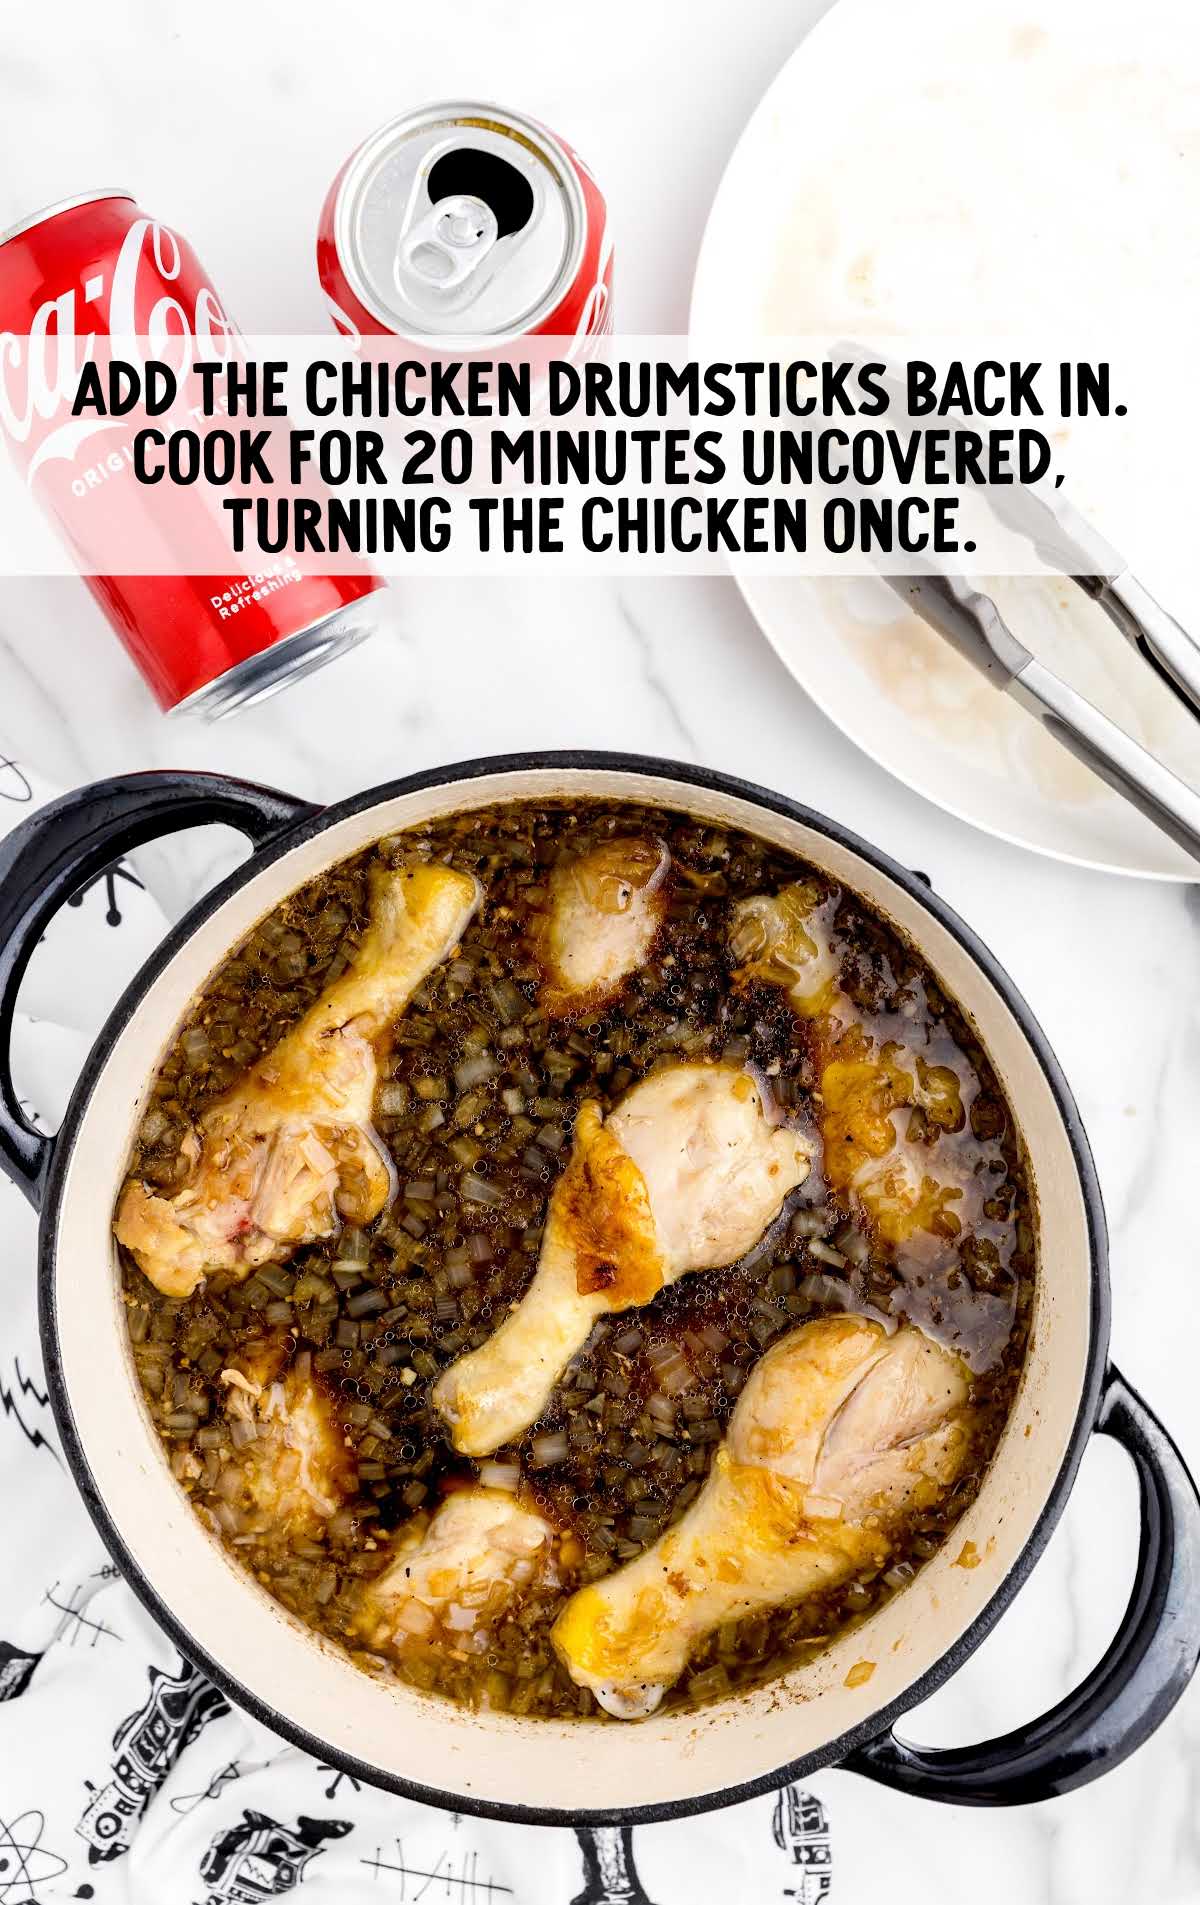 chicken drumsticks added to the coca-cola sauce in the pot